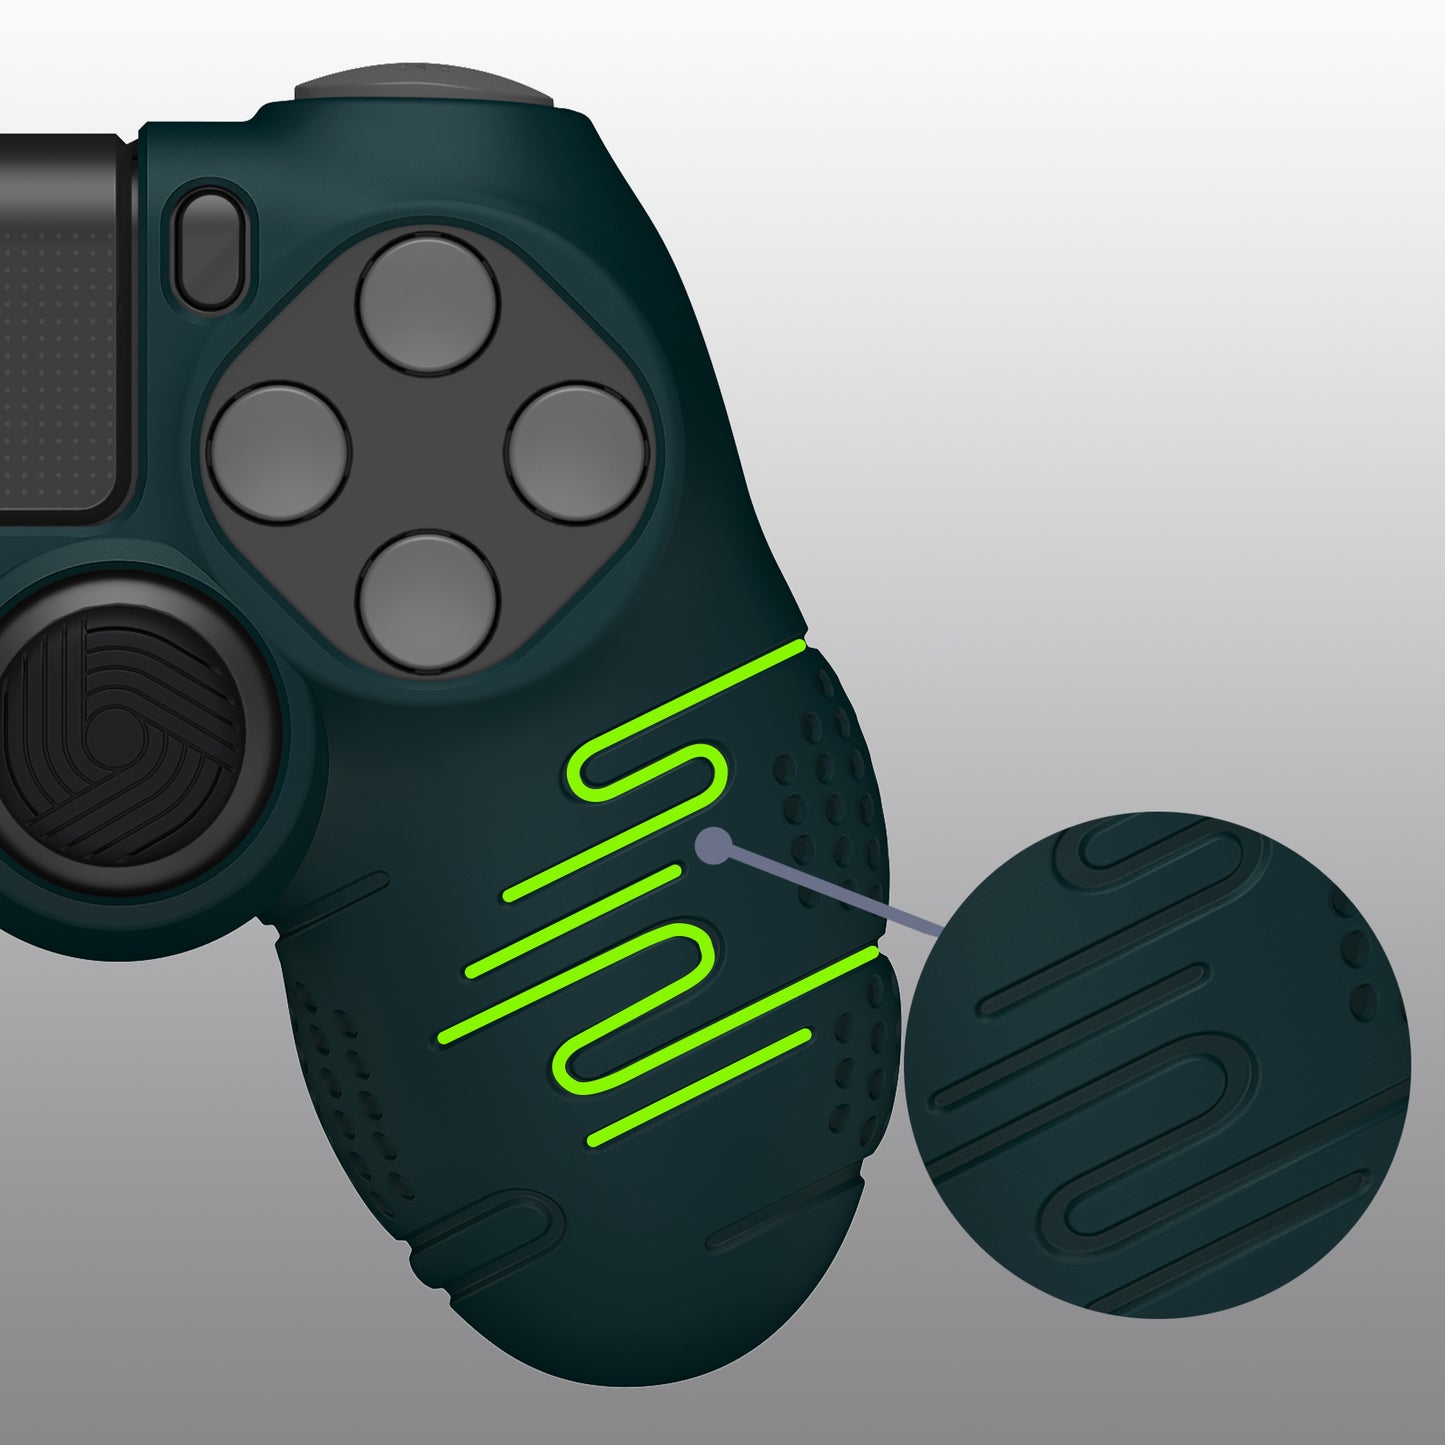 PlayVital Line & Dot Silicone Cover Skin with Thumb Grip Caps for PS4 Slim Pro Controller - Racing Green - CLRP4P003